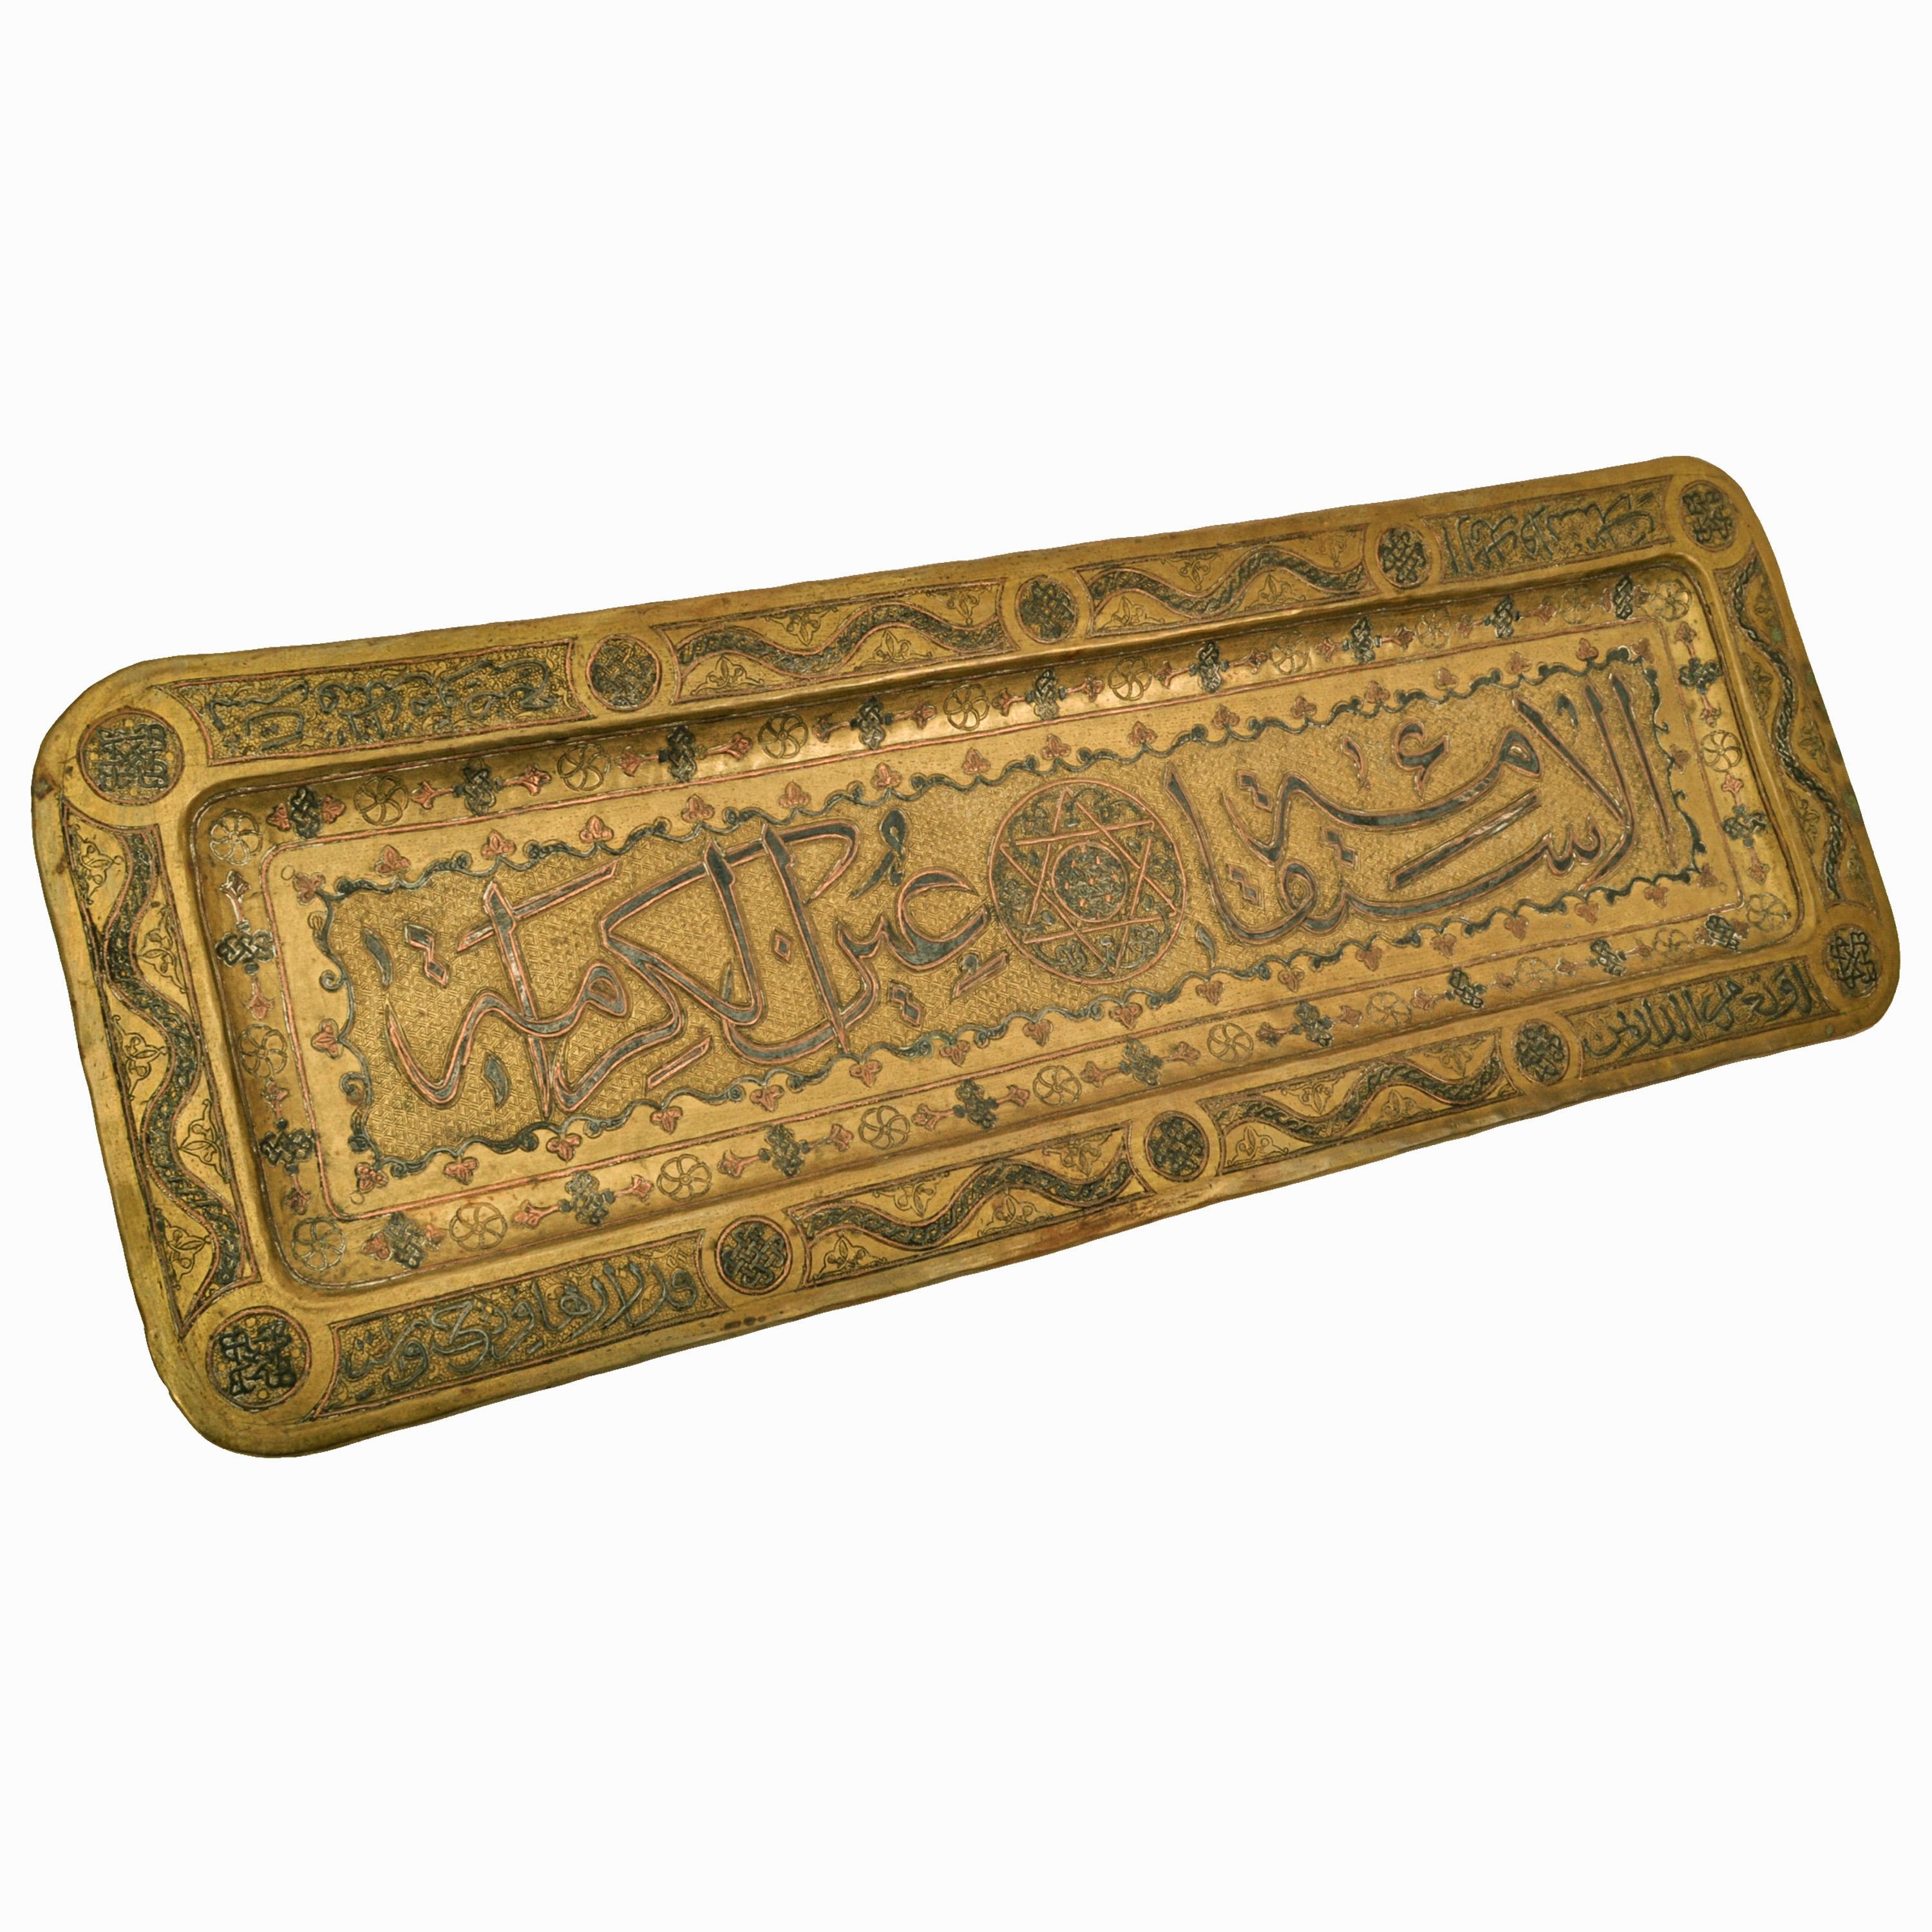 A large and fine Islamic Mamluk Revival silver inlaid copper tray, circa 1880.
The tray generically referred to as Cairoware is earlier than most and also of very fine quality, the tray likely made in Damascus. The tray's border having four bands